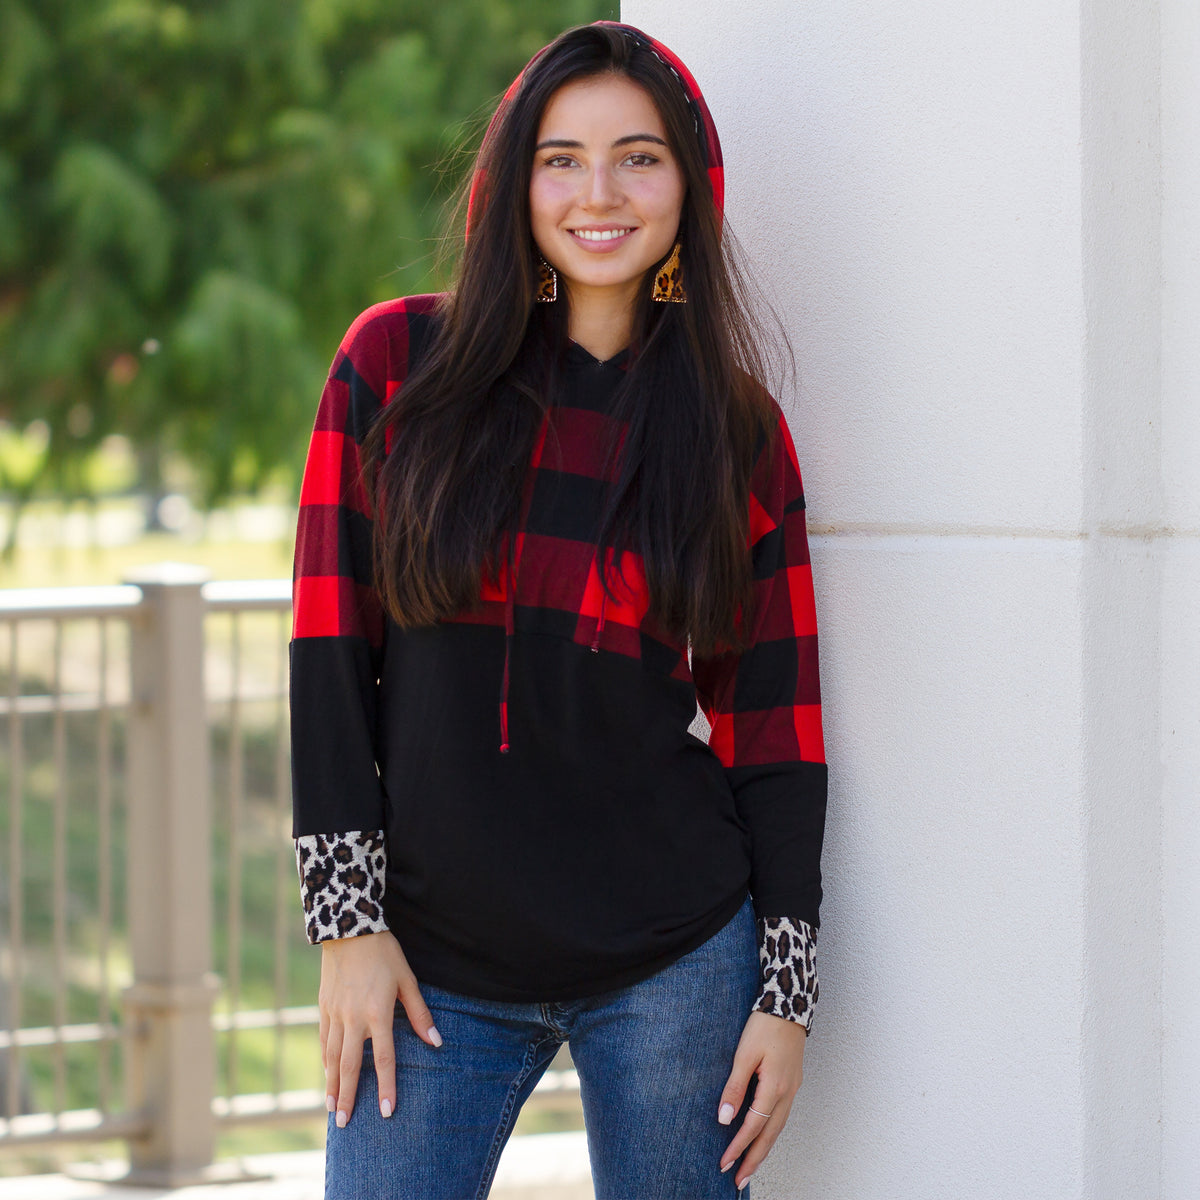 10431 - Buffalo Plaid Hoodie Top with Leopard Accents